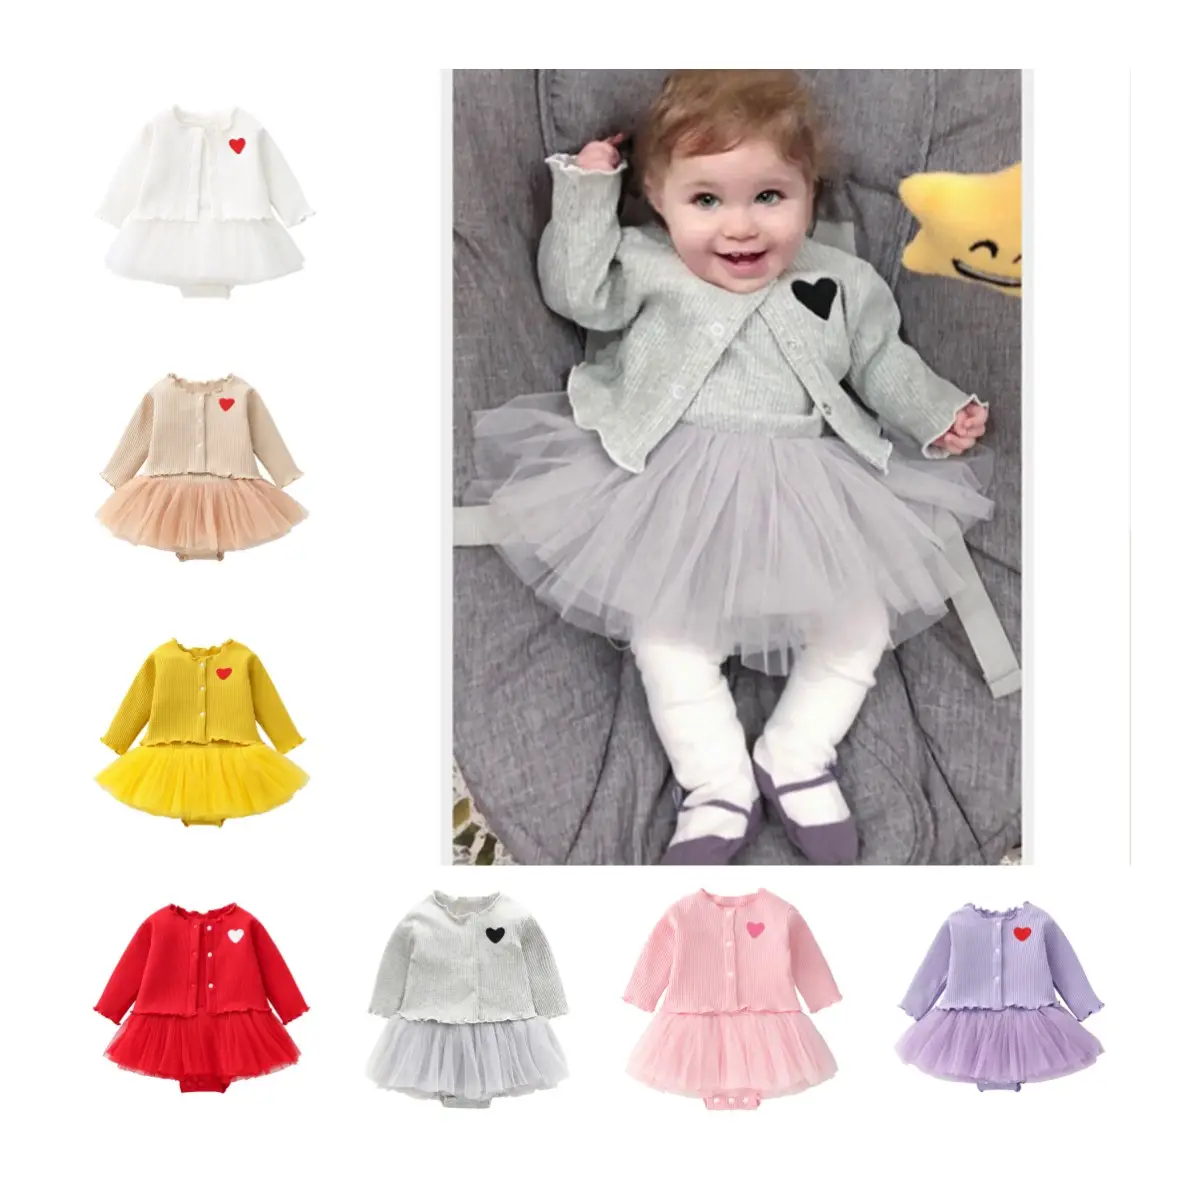 Plain Color Ruffled Sleeveless Baby Girls Romper Dress Knitwear Cardigan Suit Soft Cute Embroidery Infants Toddlers Clothing Set